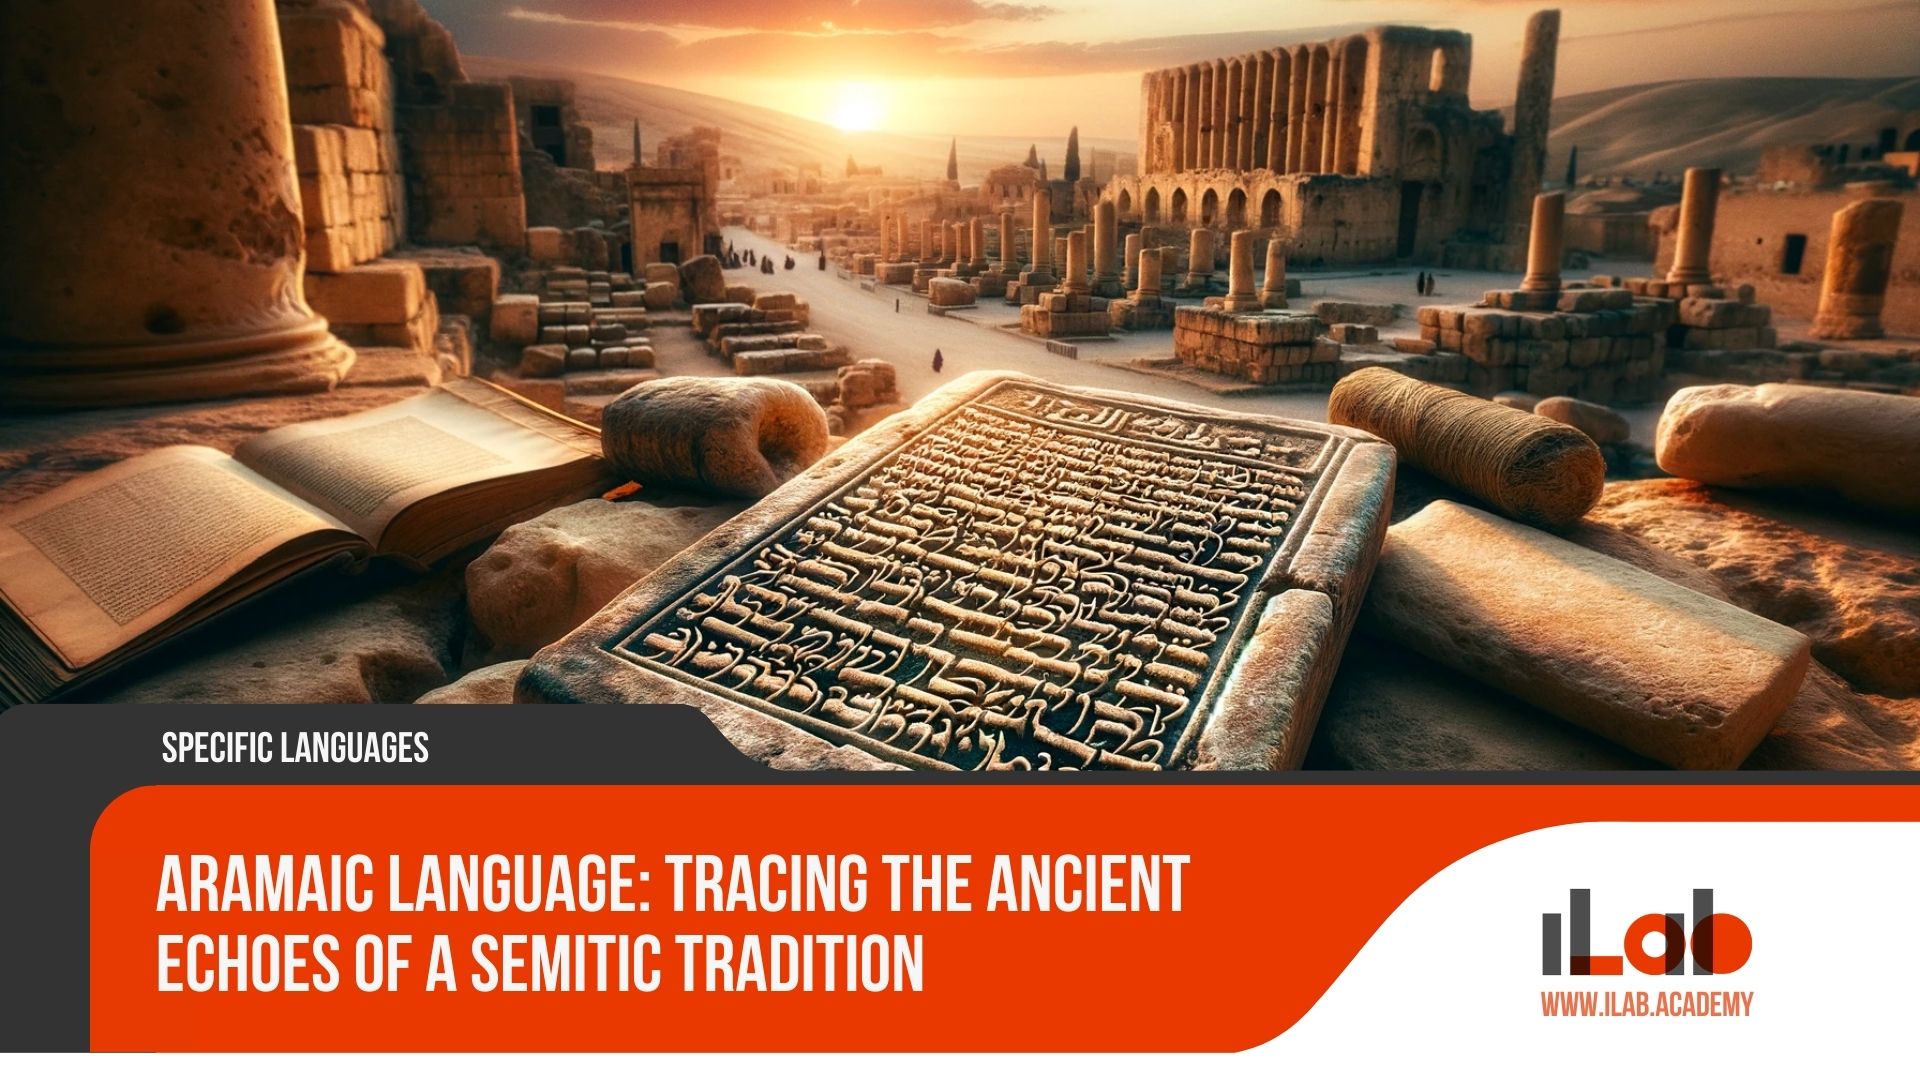 Aramaic Language: Tracing the Ancient Echoes of a Semitic Tradition